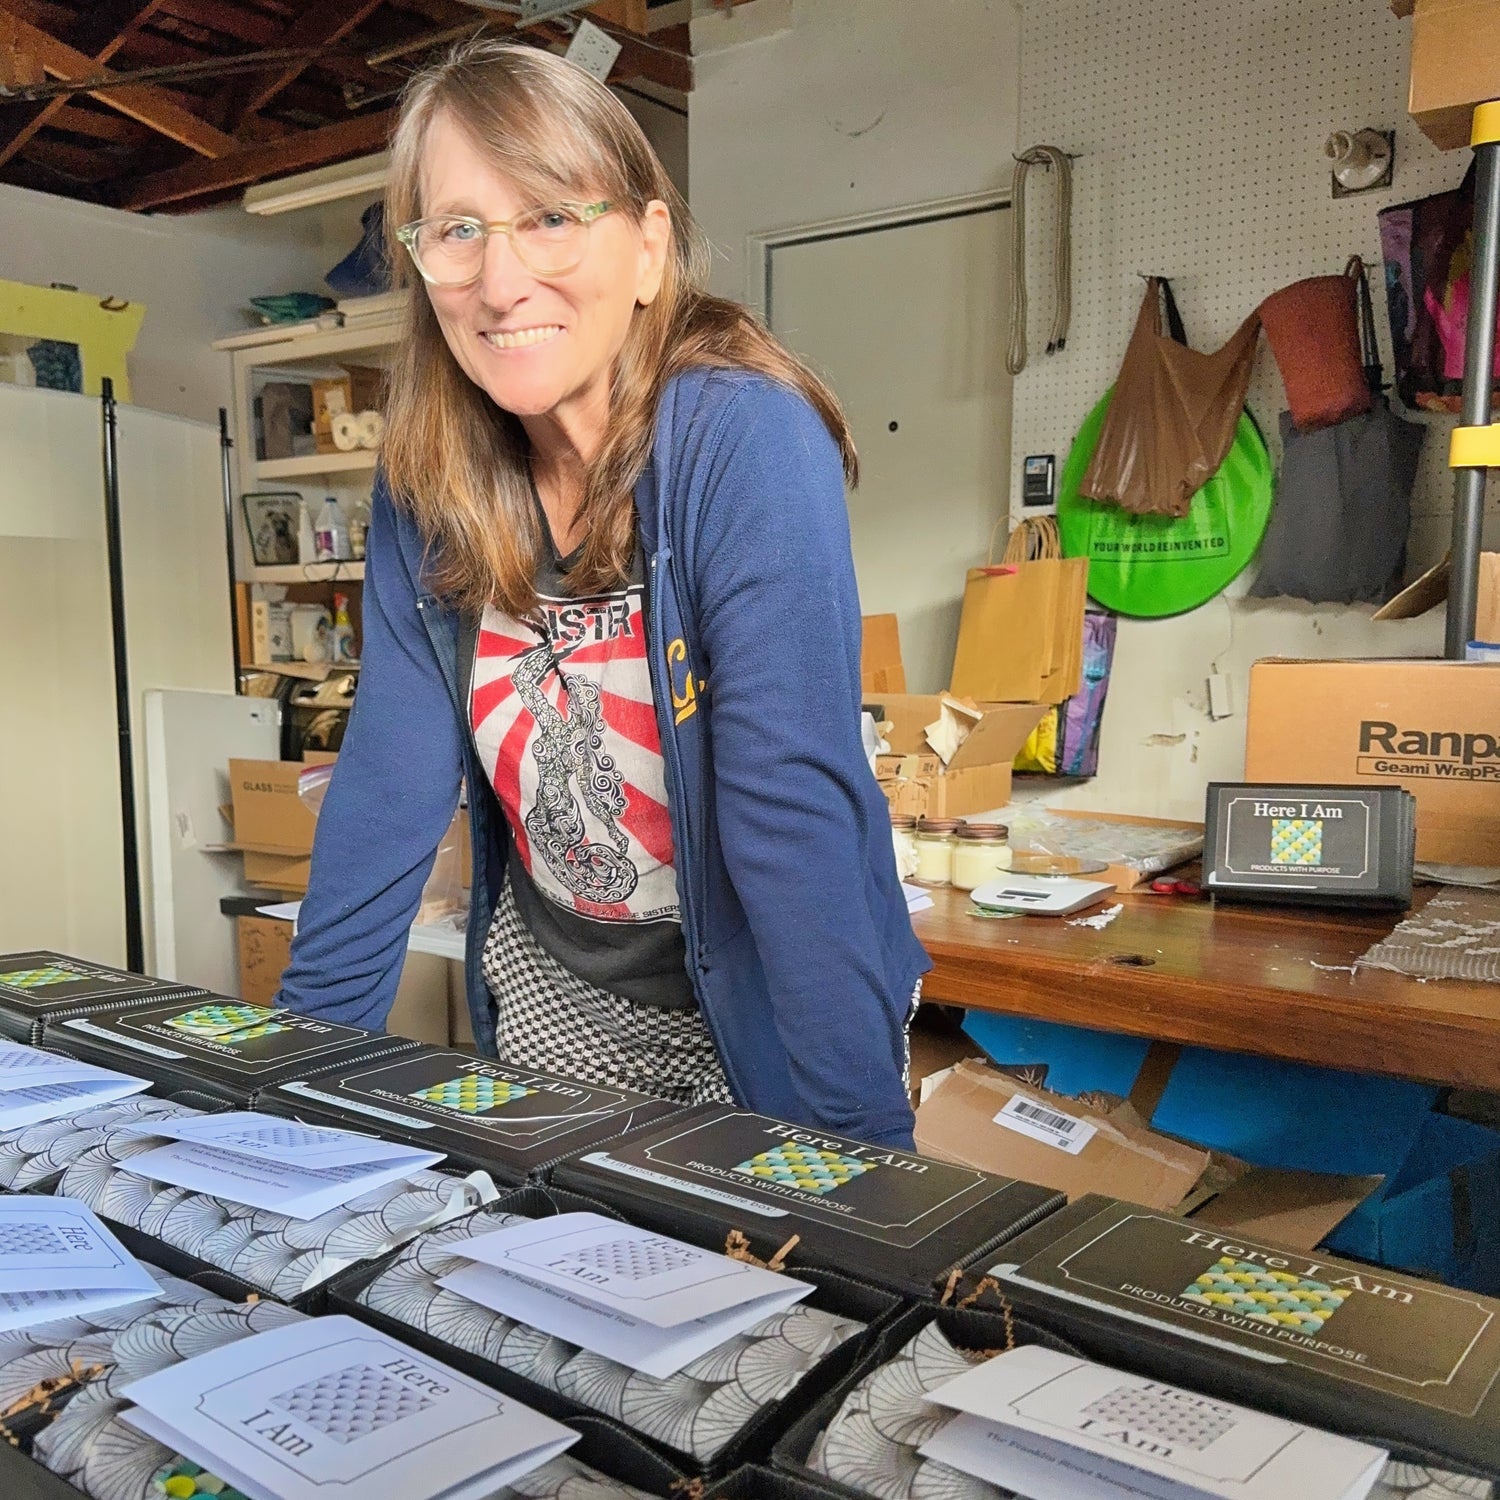 Photograph of Renee in the workshop standing over a table full of boxes ready to be shipped